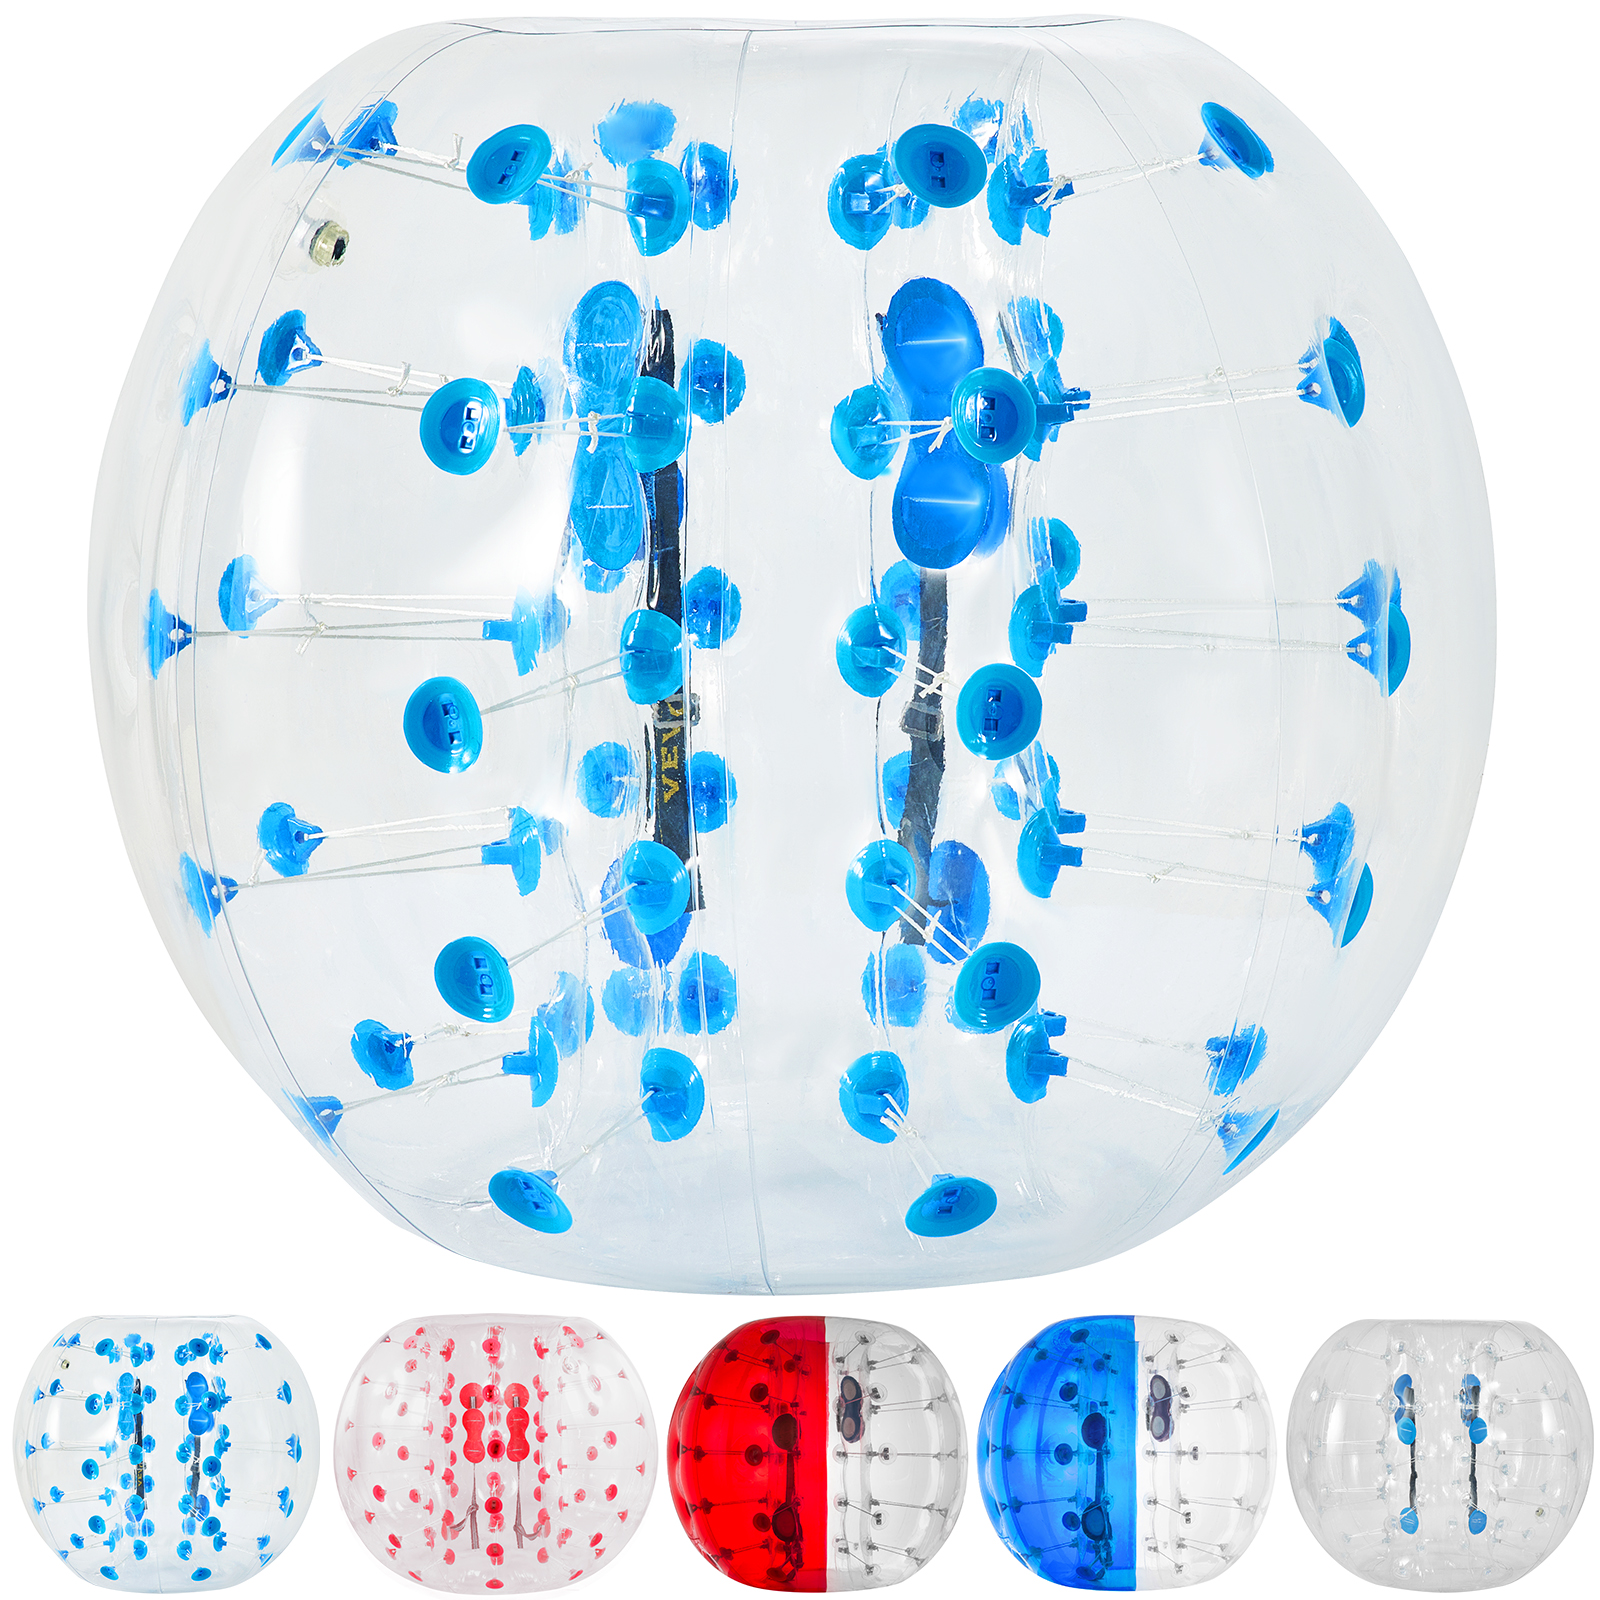 1.2m Inflatable Bumper Ball Football Zorb Ball Game Blue Dot Outdoor Activity от Vevor Many GEOs